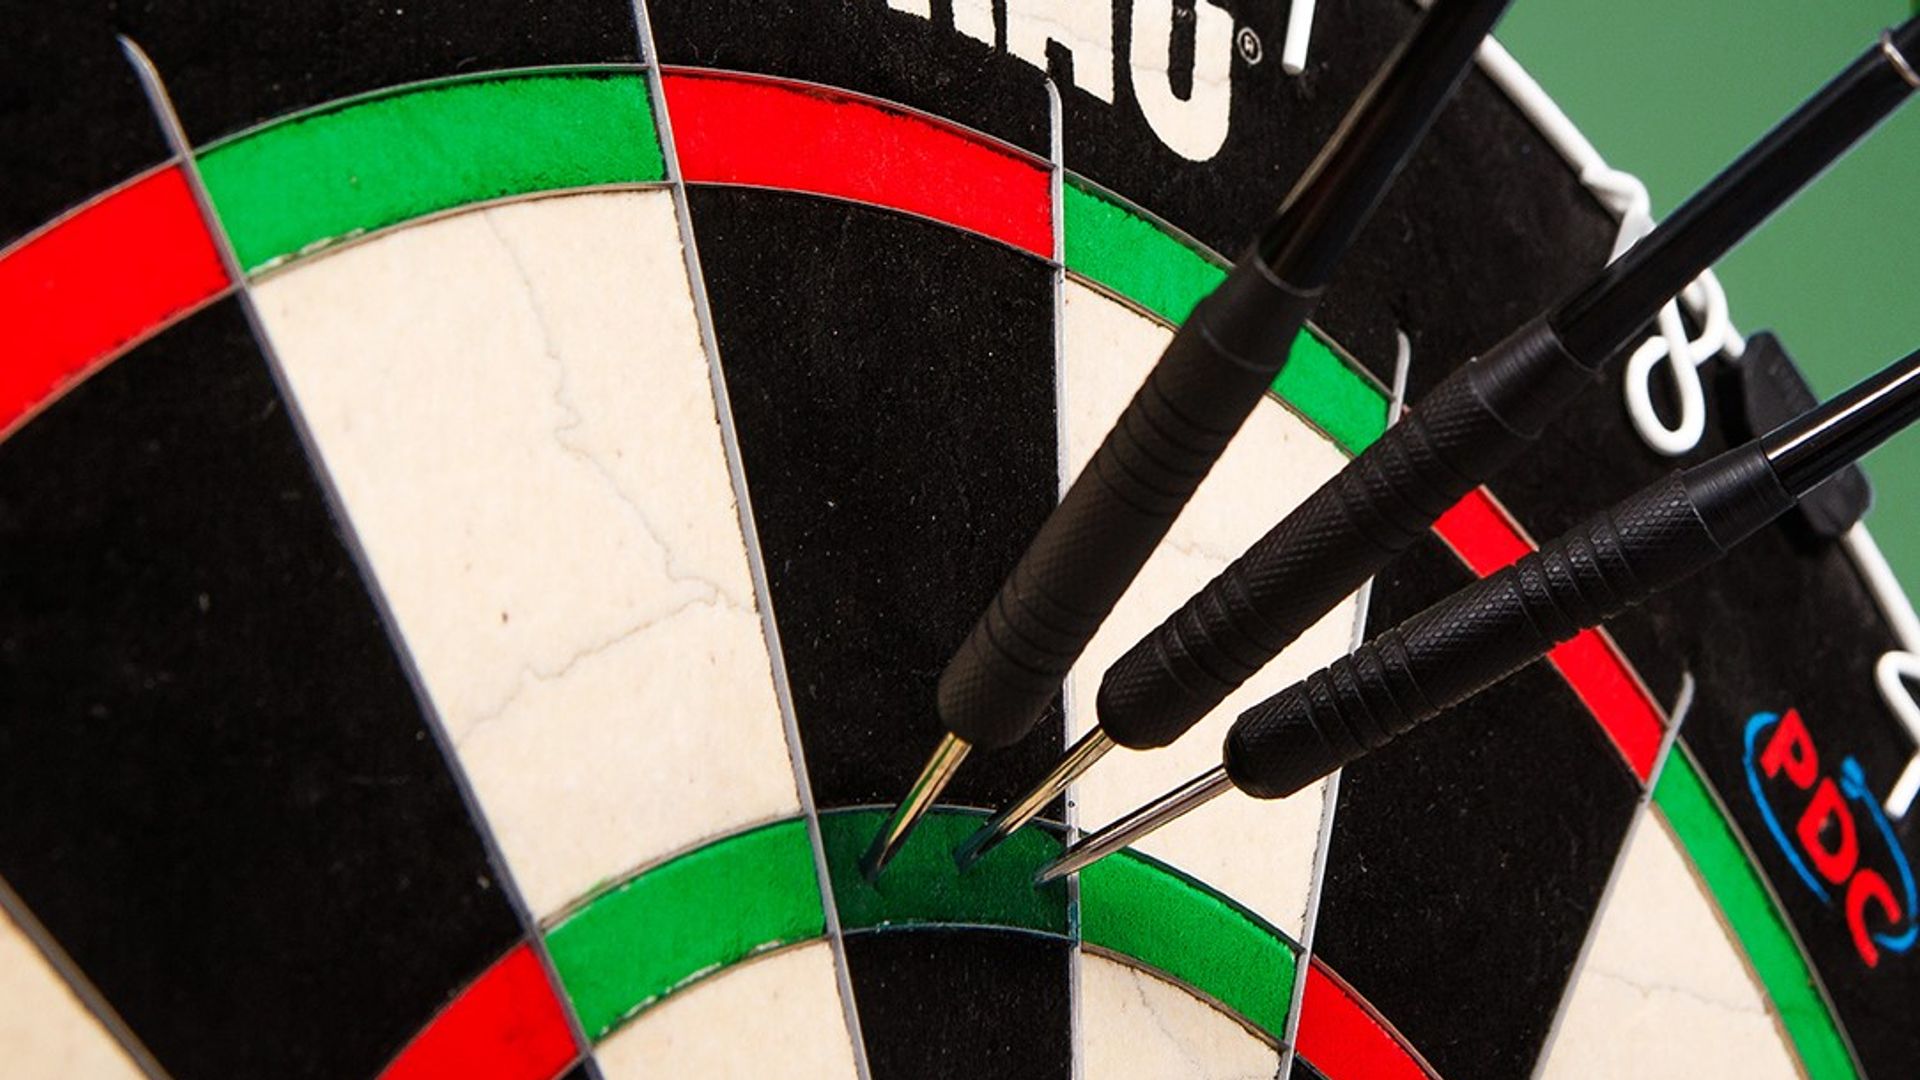 Surprise change to dart board for World Darts Championship revealed